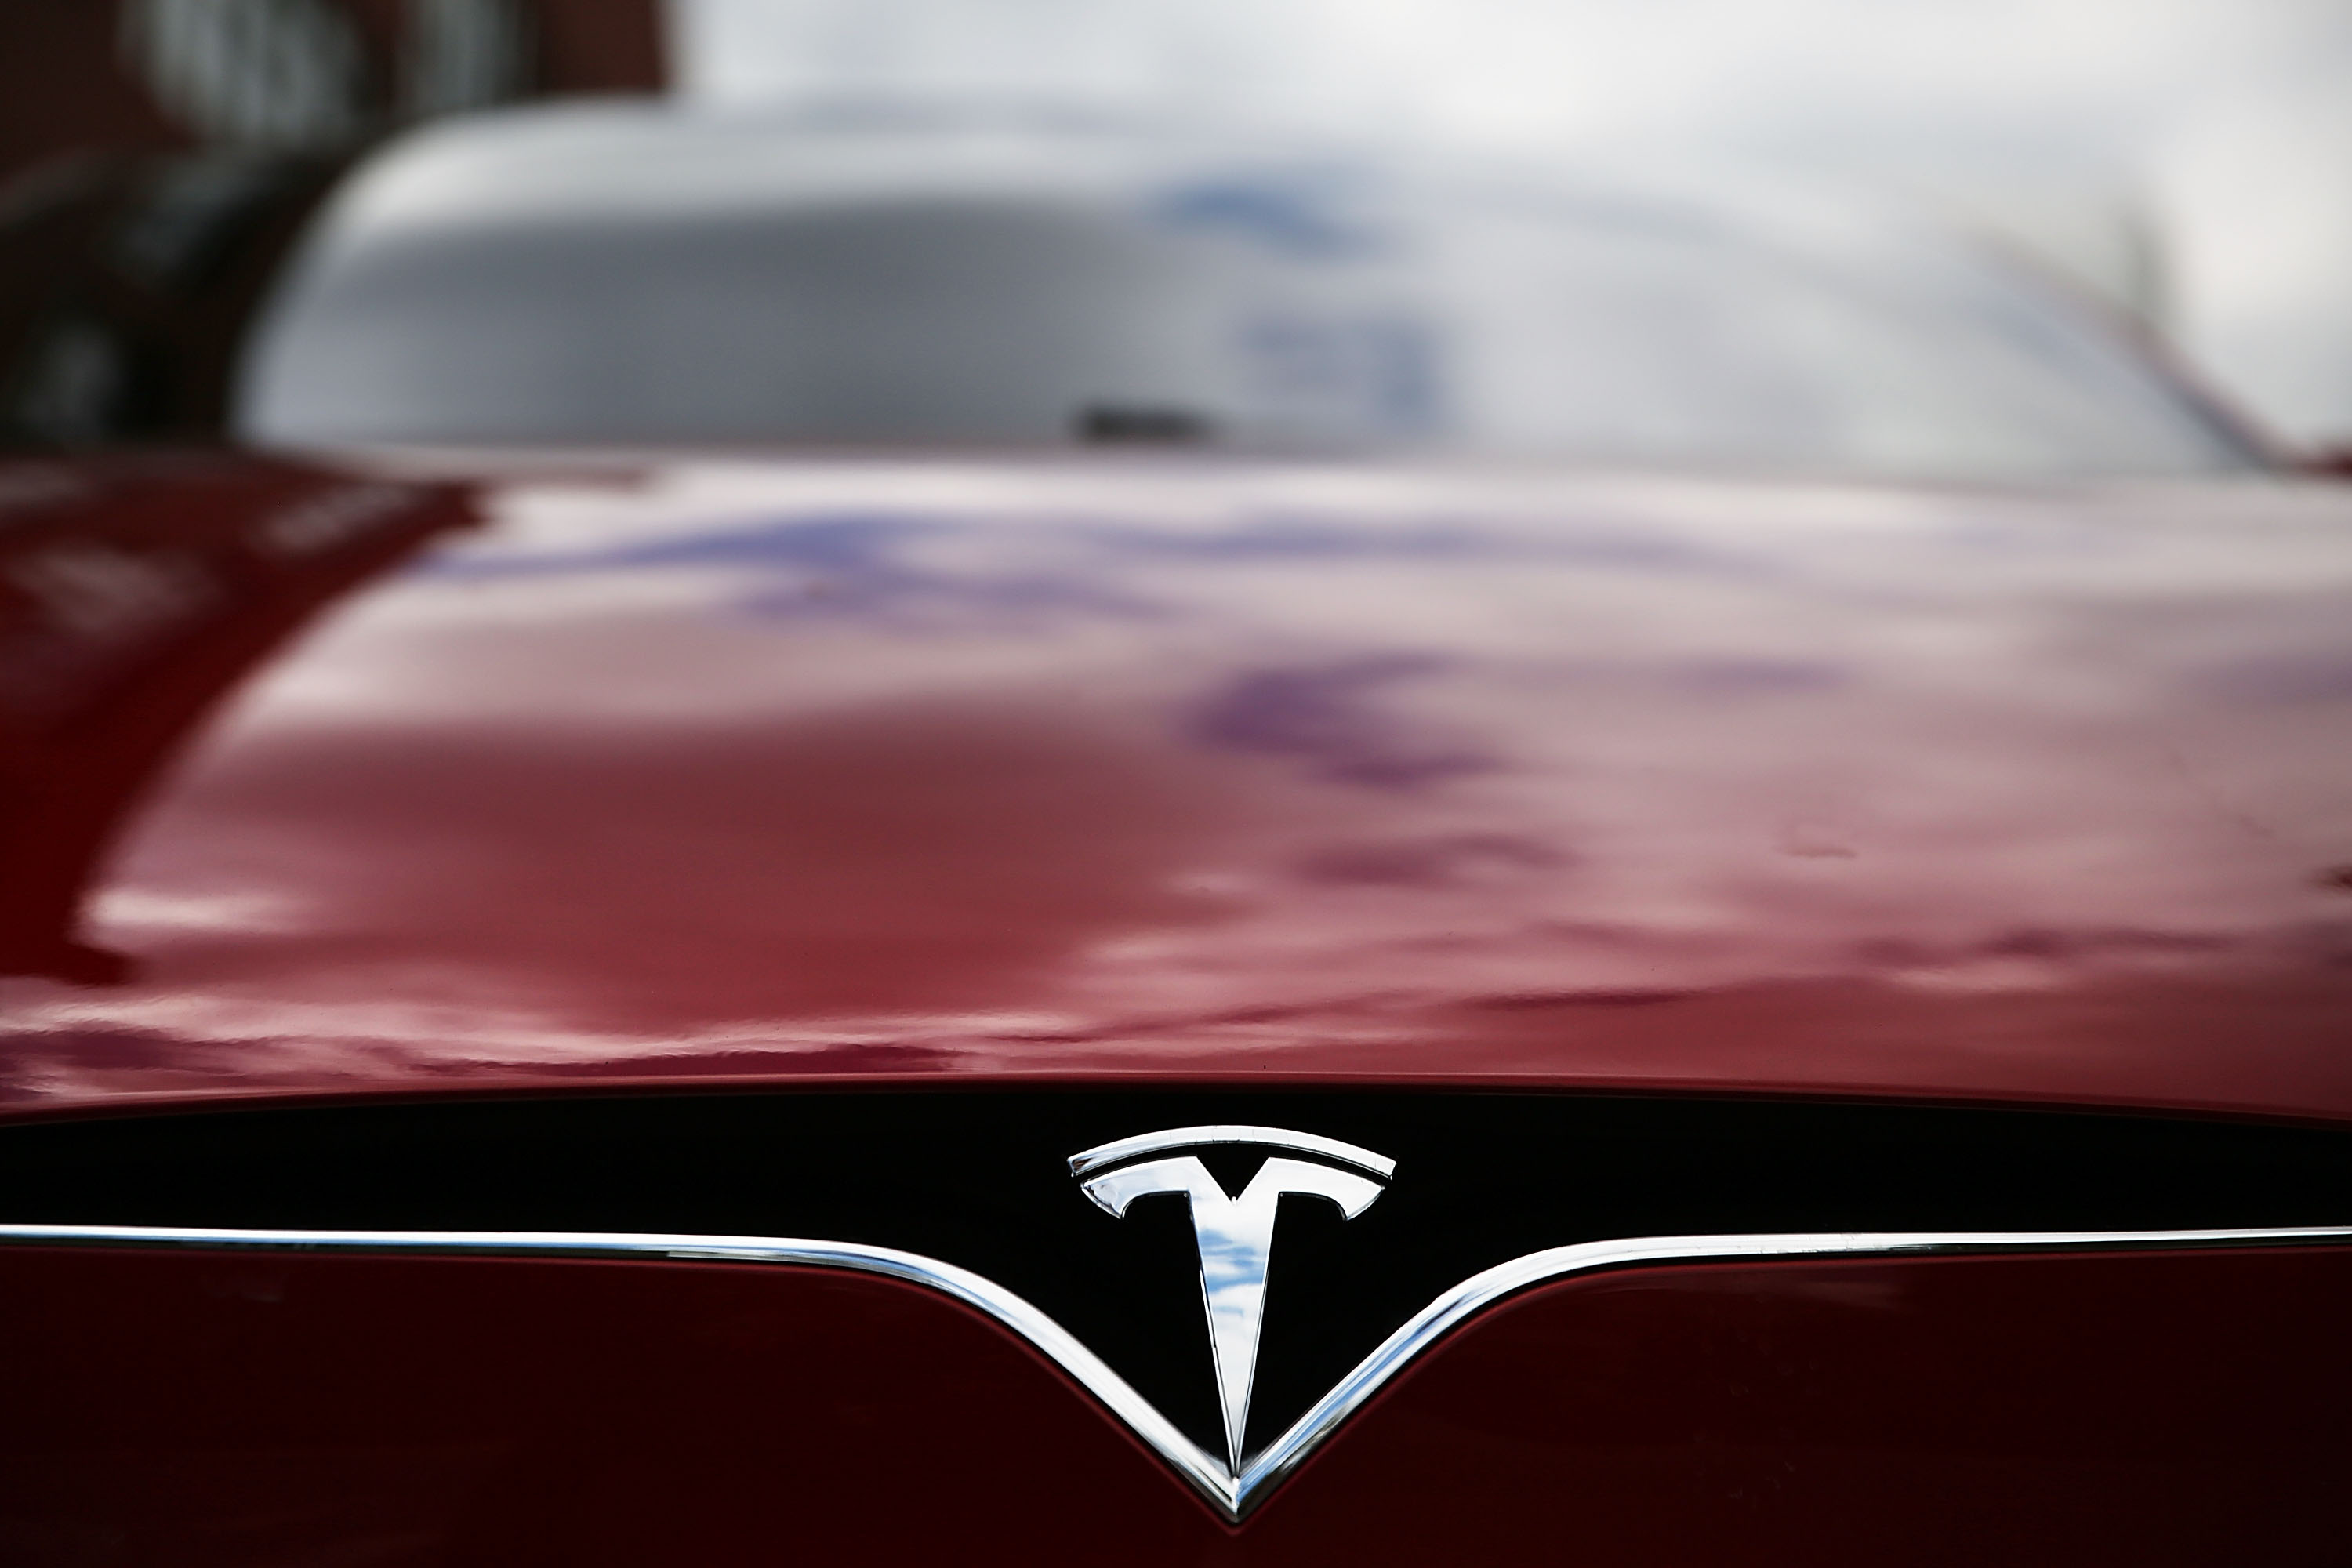 Tesla sues former employees, Zoox for alleged trade secret theft